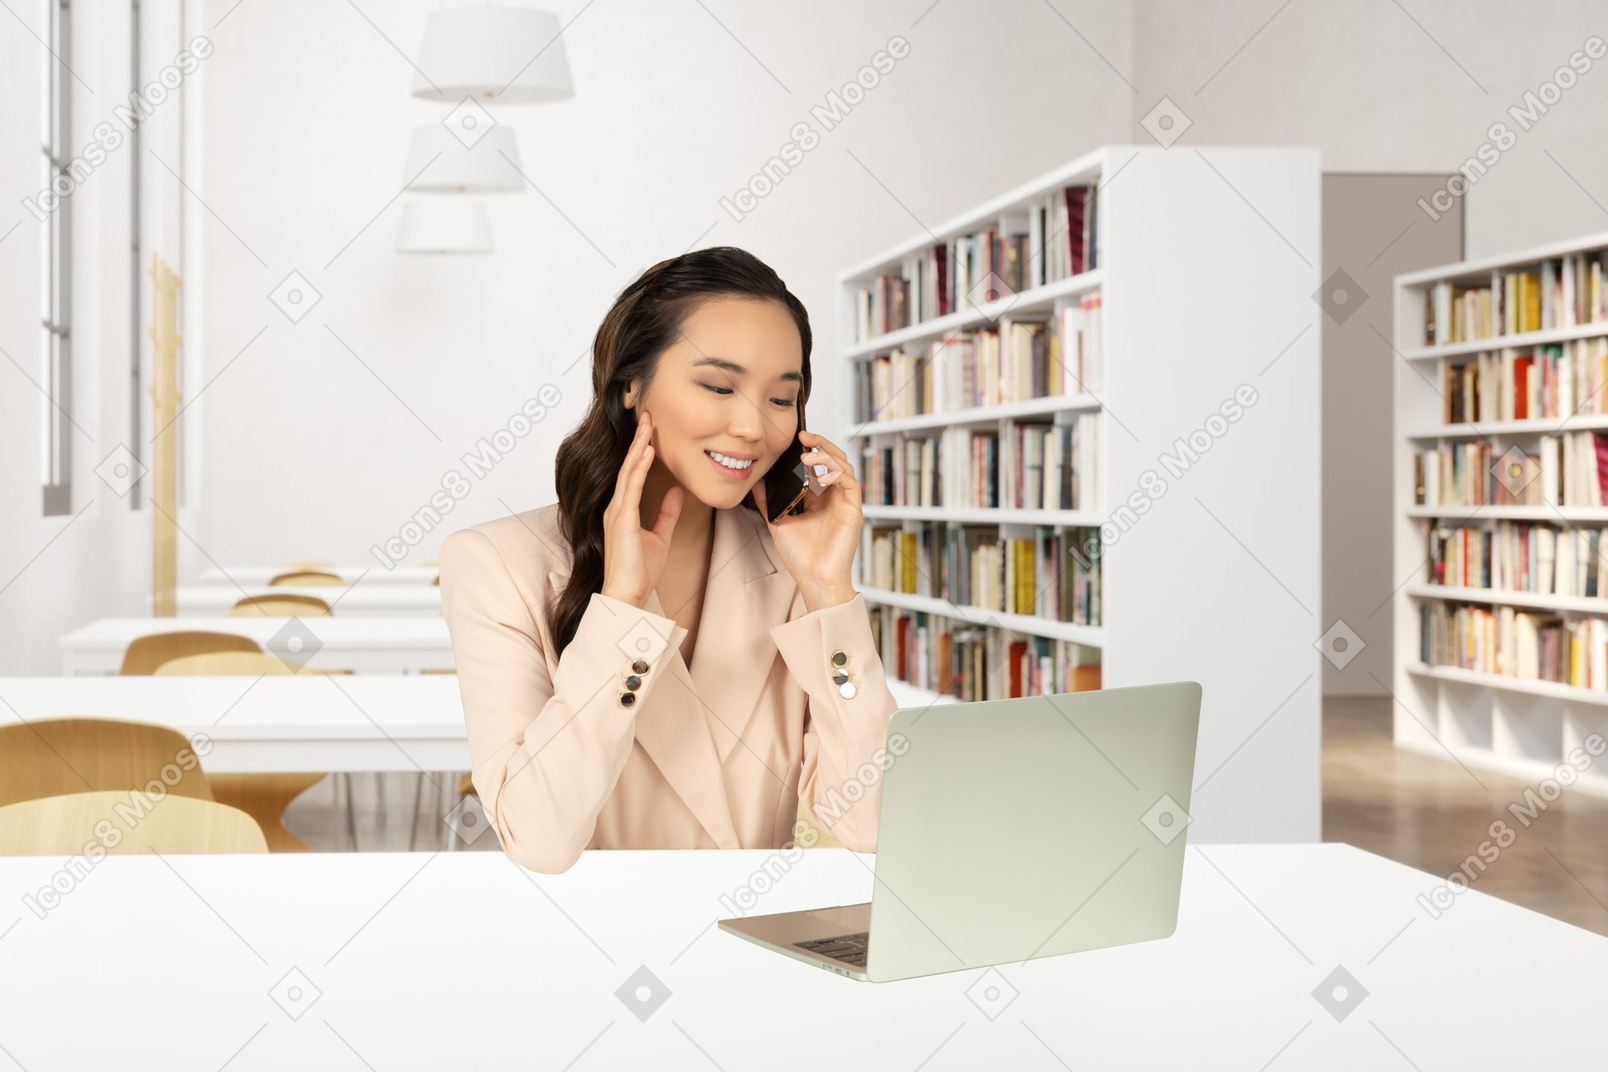 A woman talking on a cell phone while using a laptop